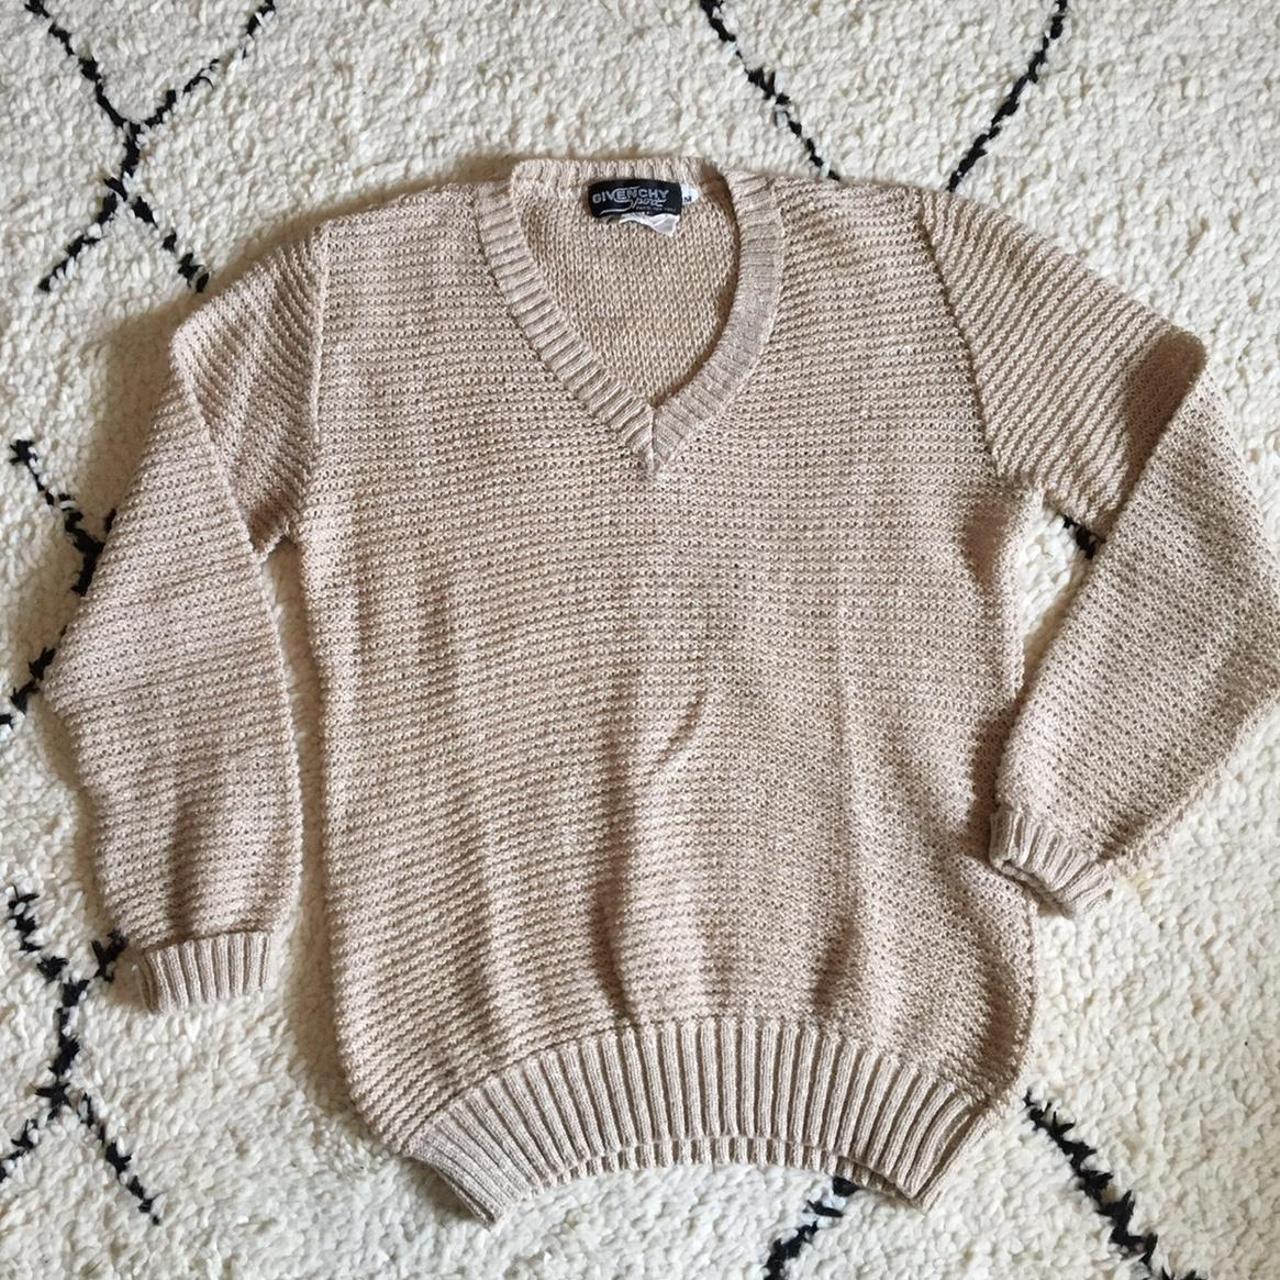 Vintage Givenchy activewear sweater (took tag off - Depop